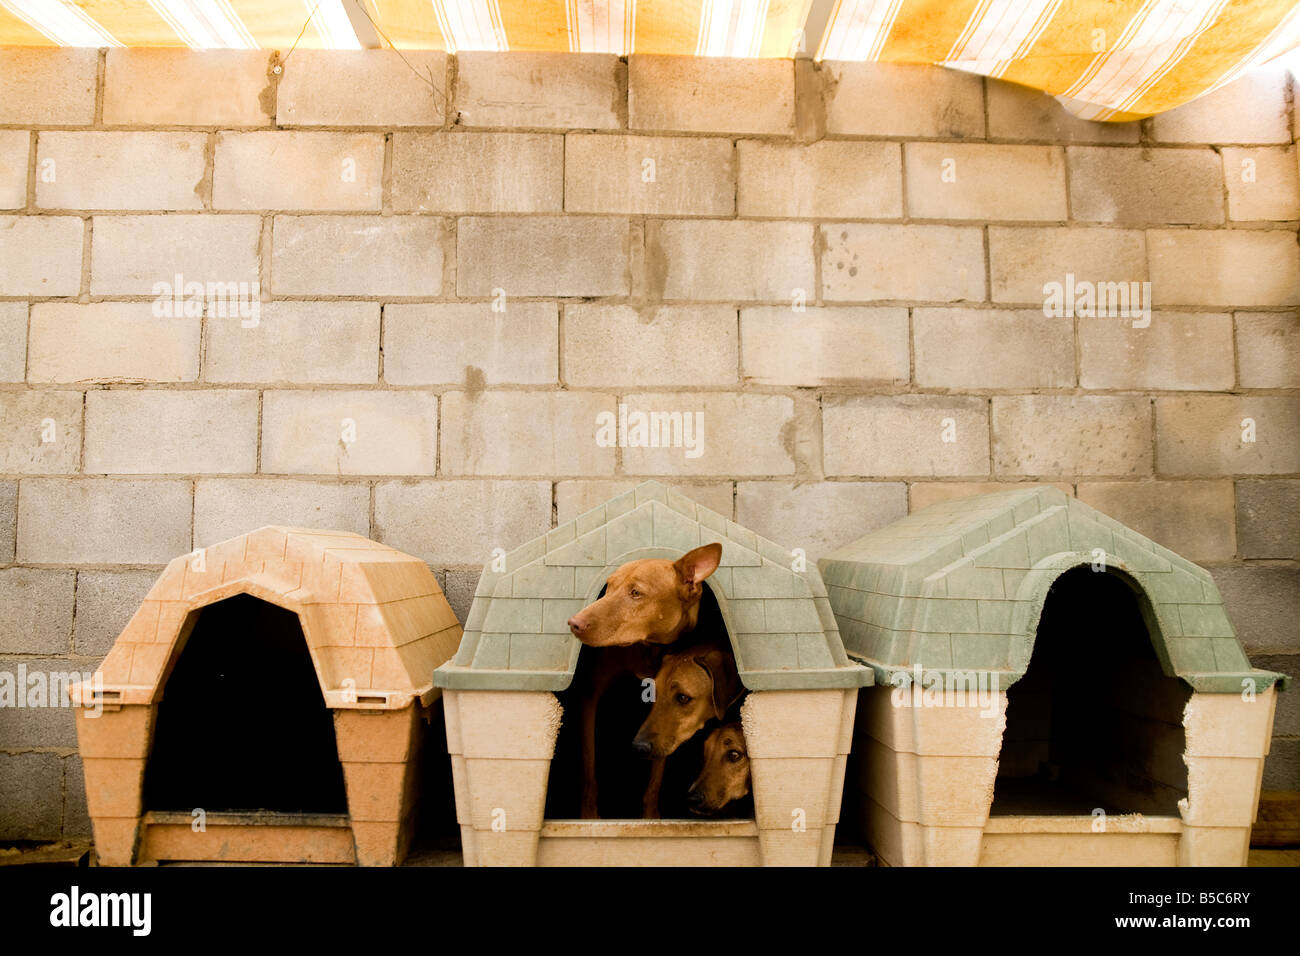 Three dogs together in a small dog house. Stock Photo